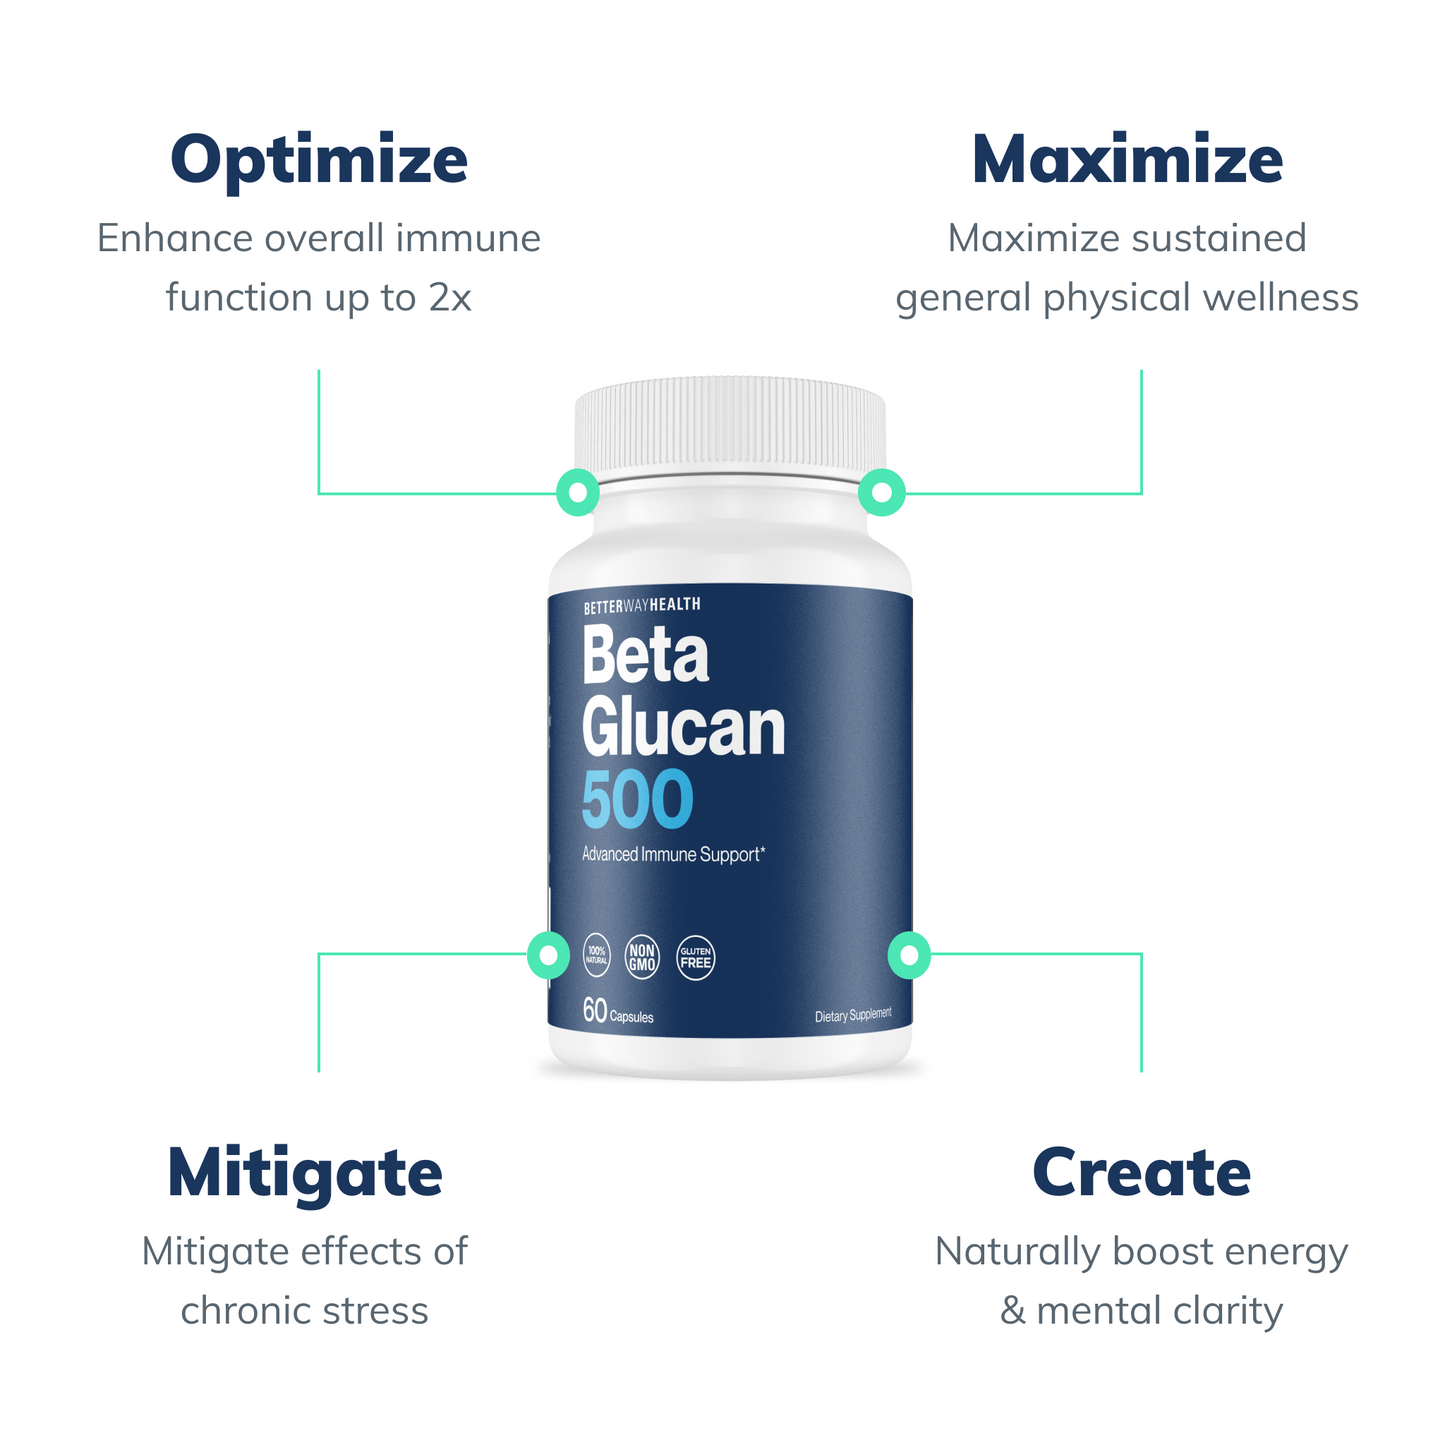 Benefits of Beta Glucan 500 graphical information included